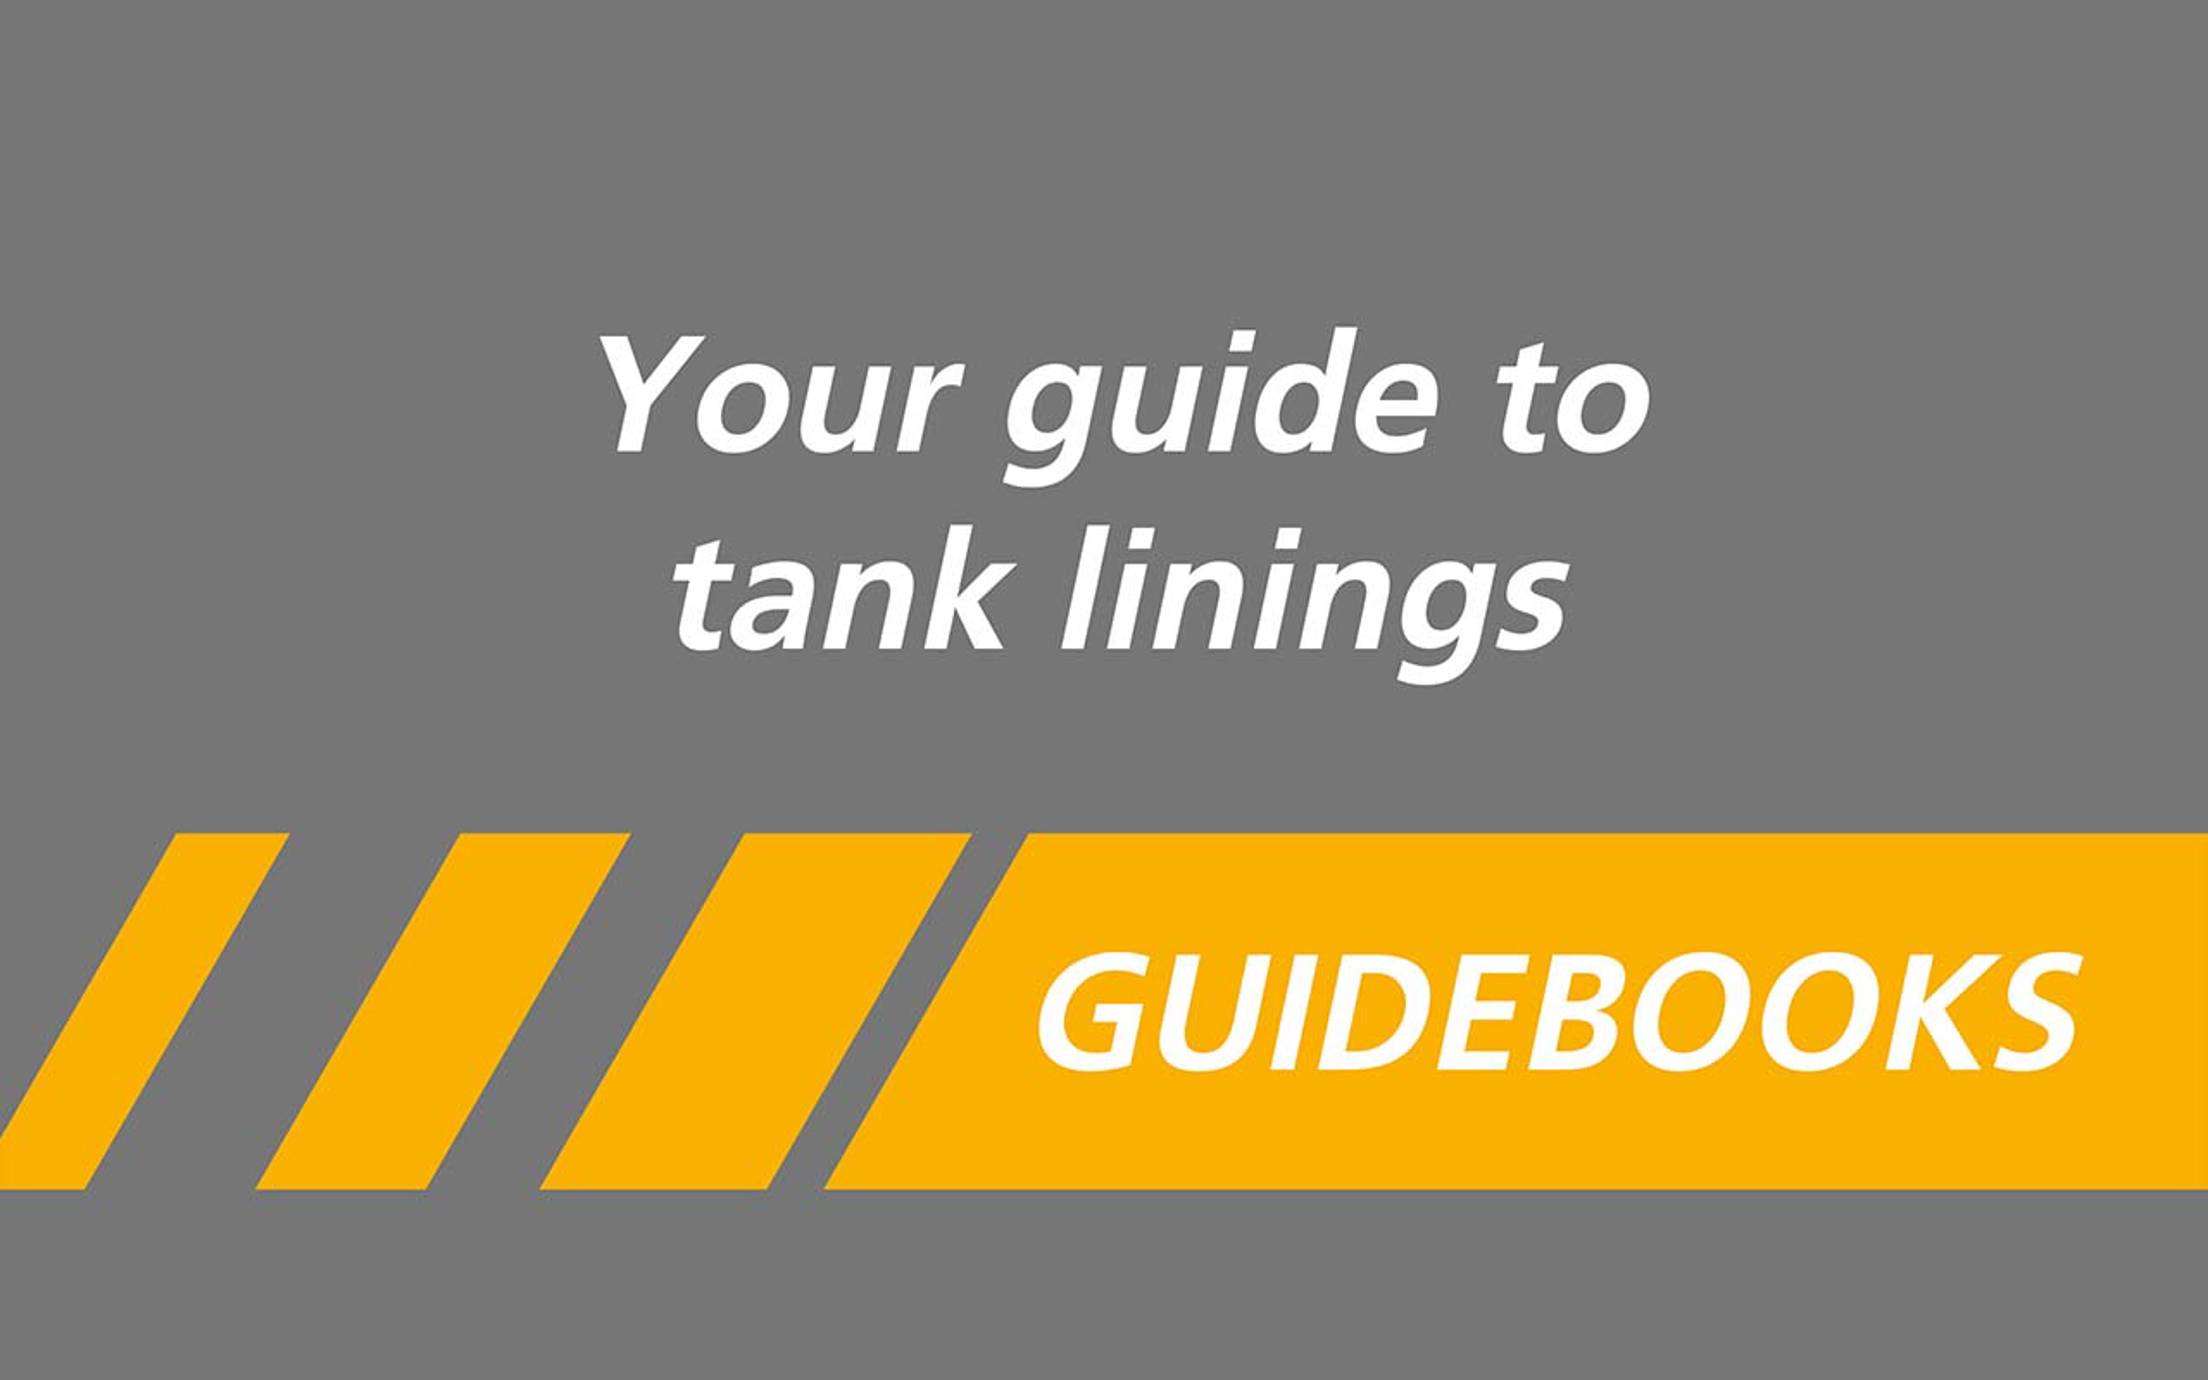 Image showing title of Jotun's guide book called Your guide to tank linings